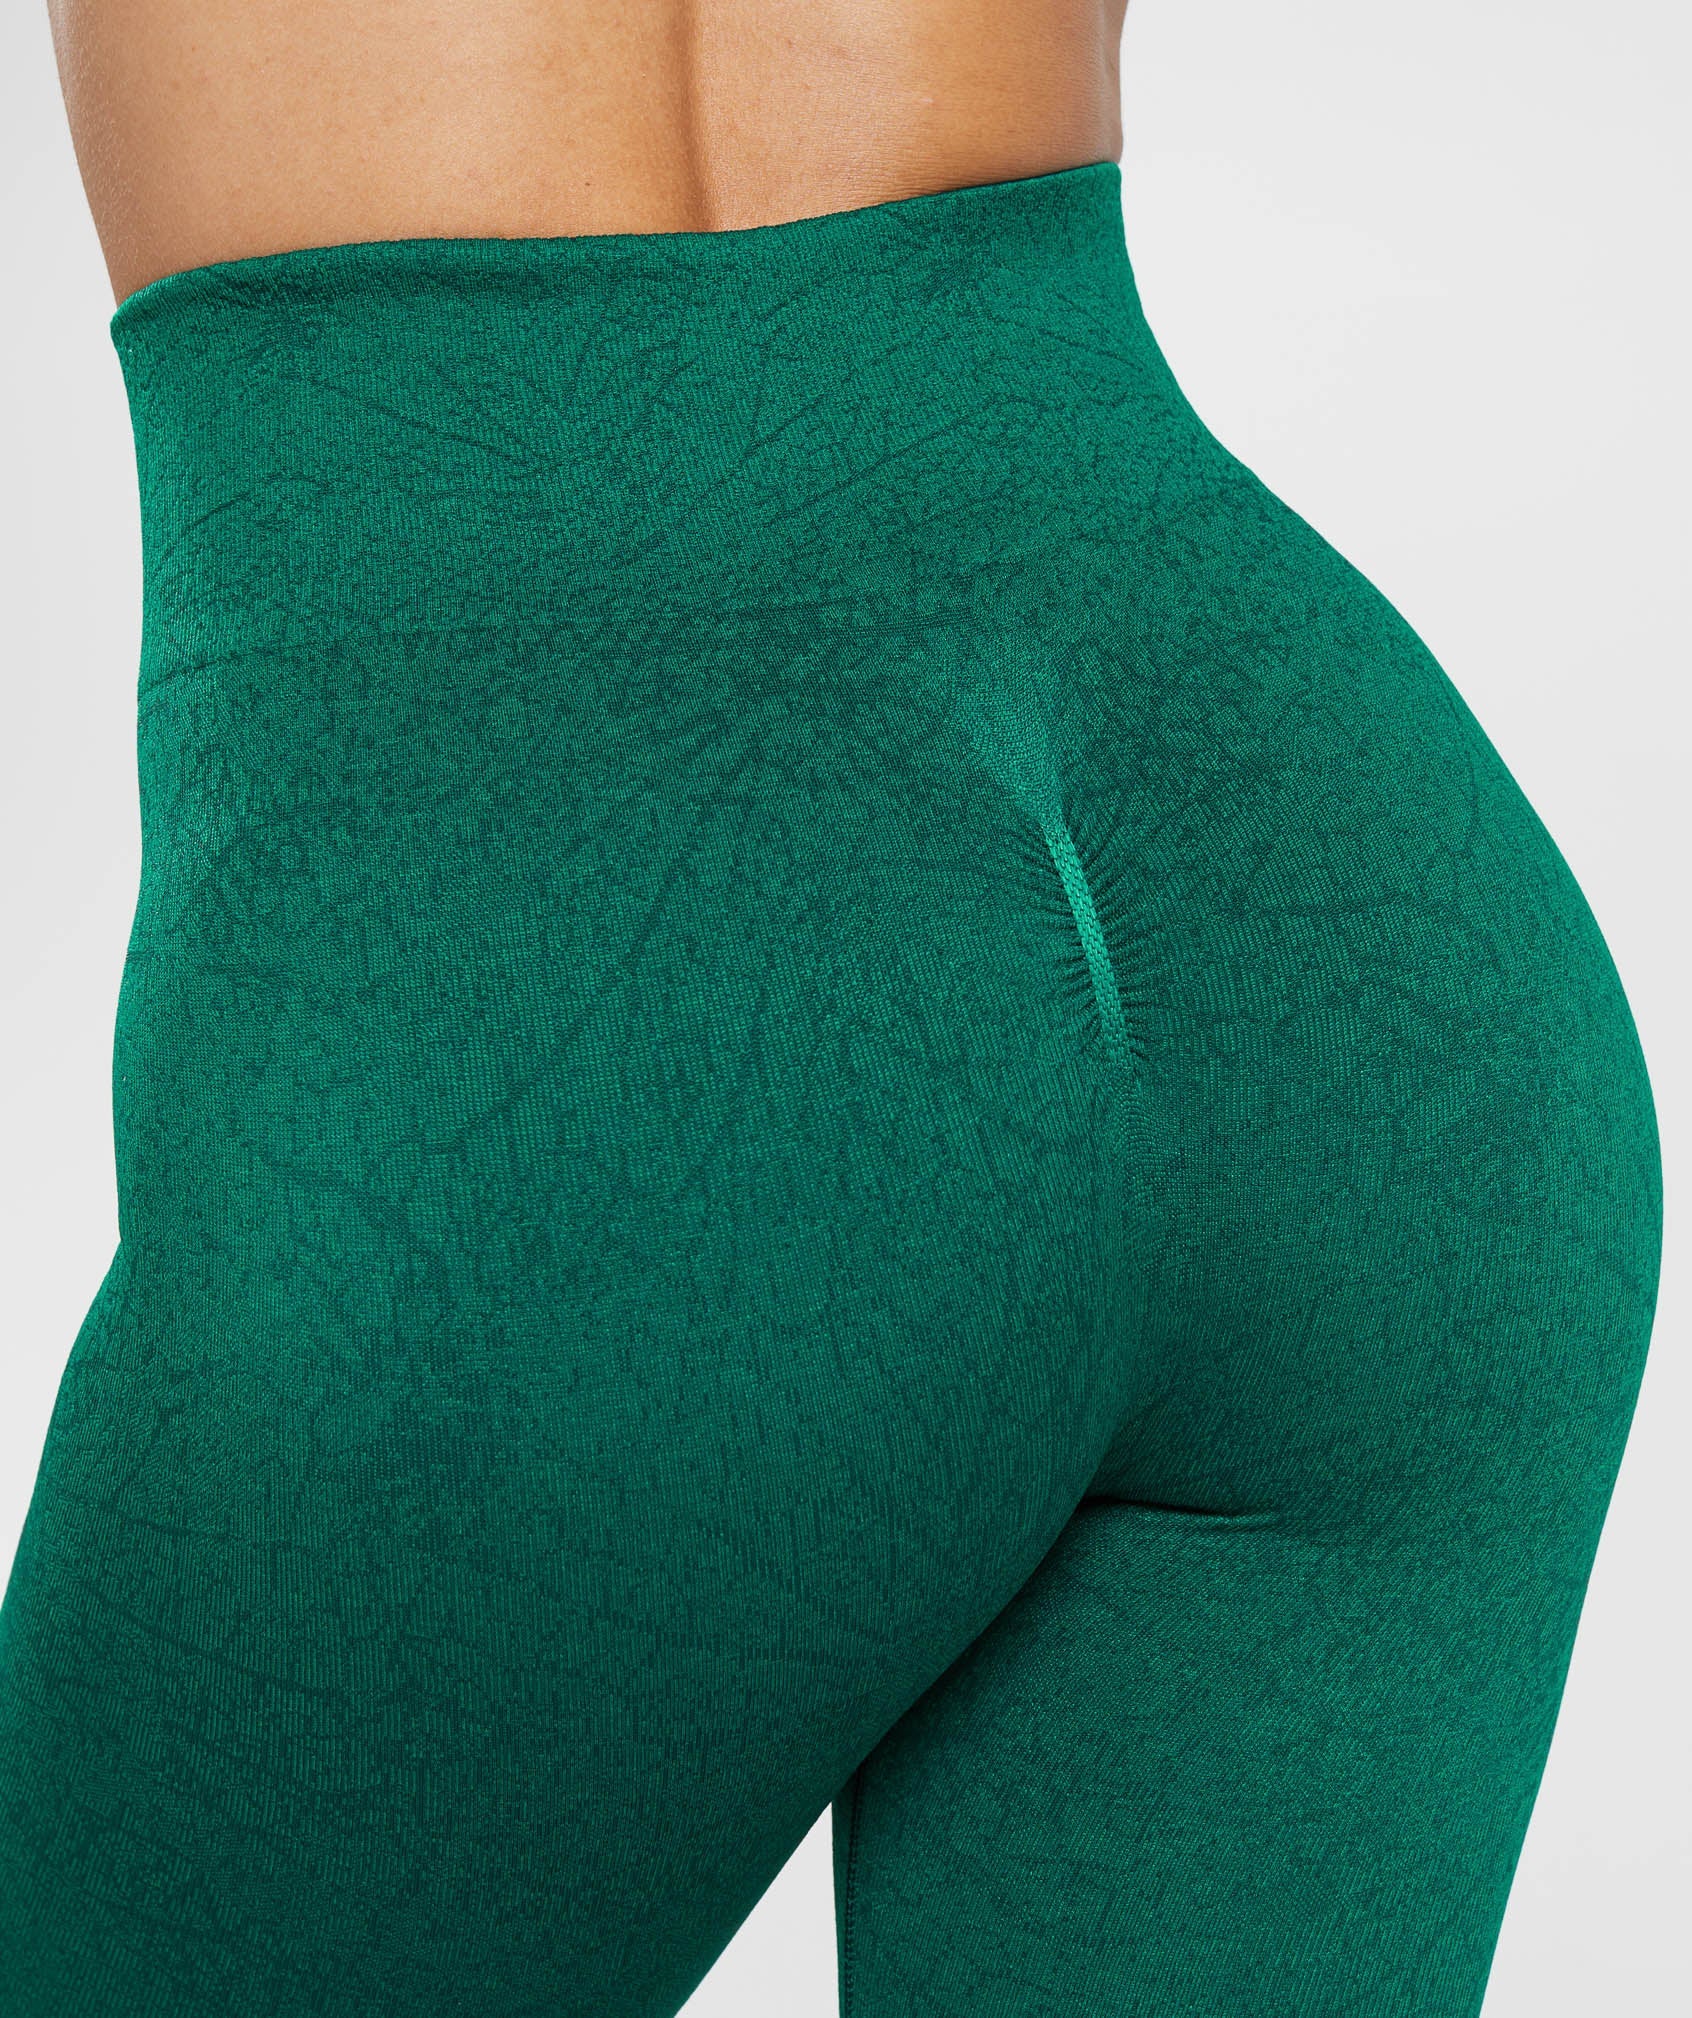 Adapt Pattern Seamless Leggings in Forest Green/Rich Green - view 6